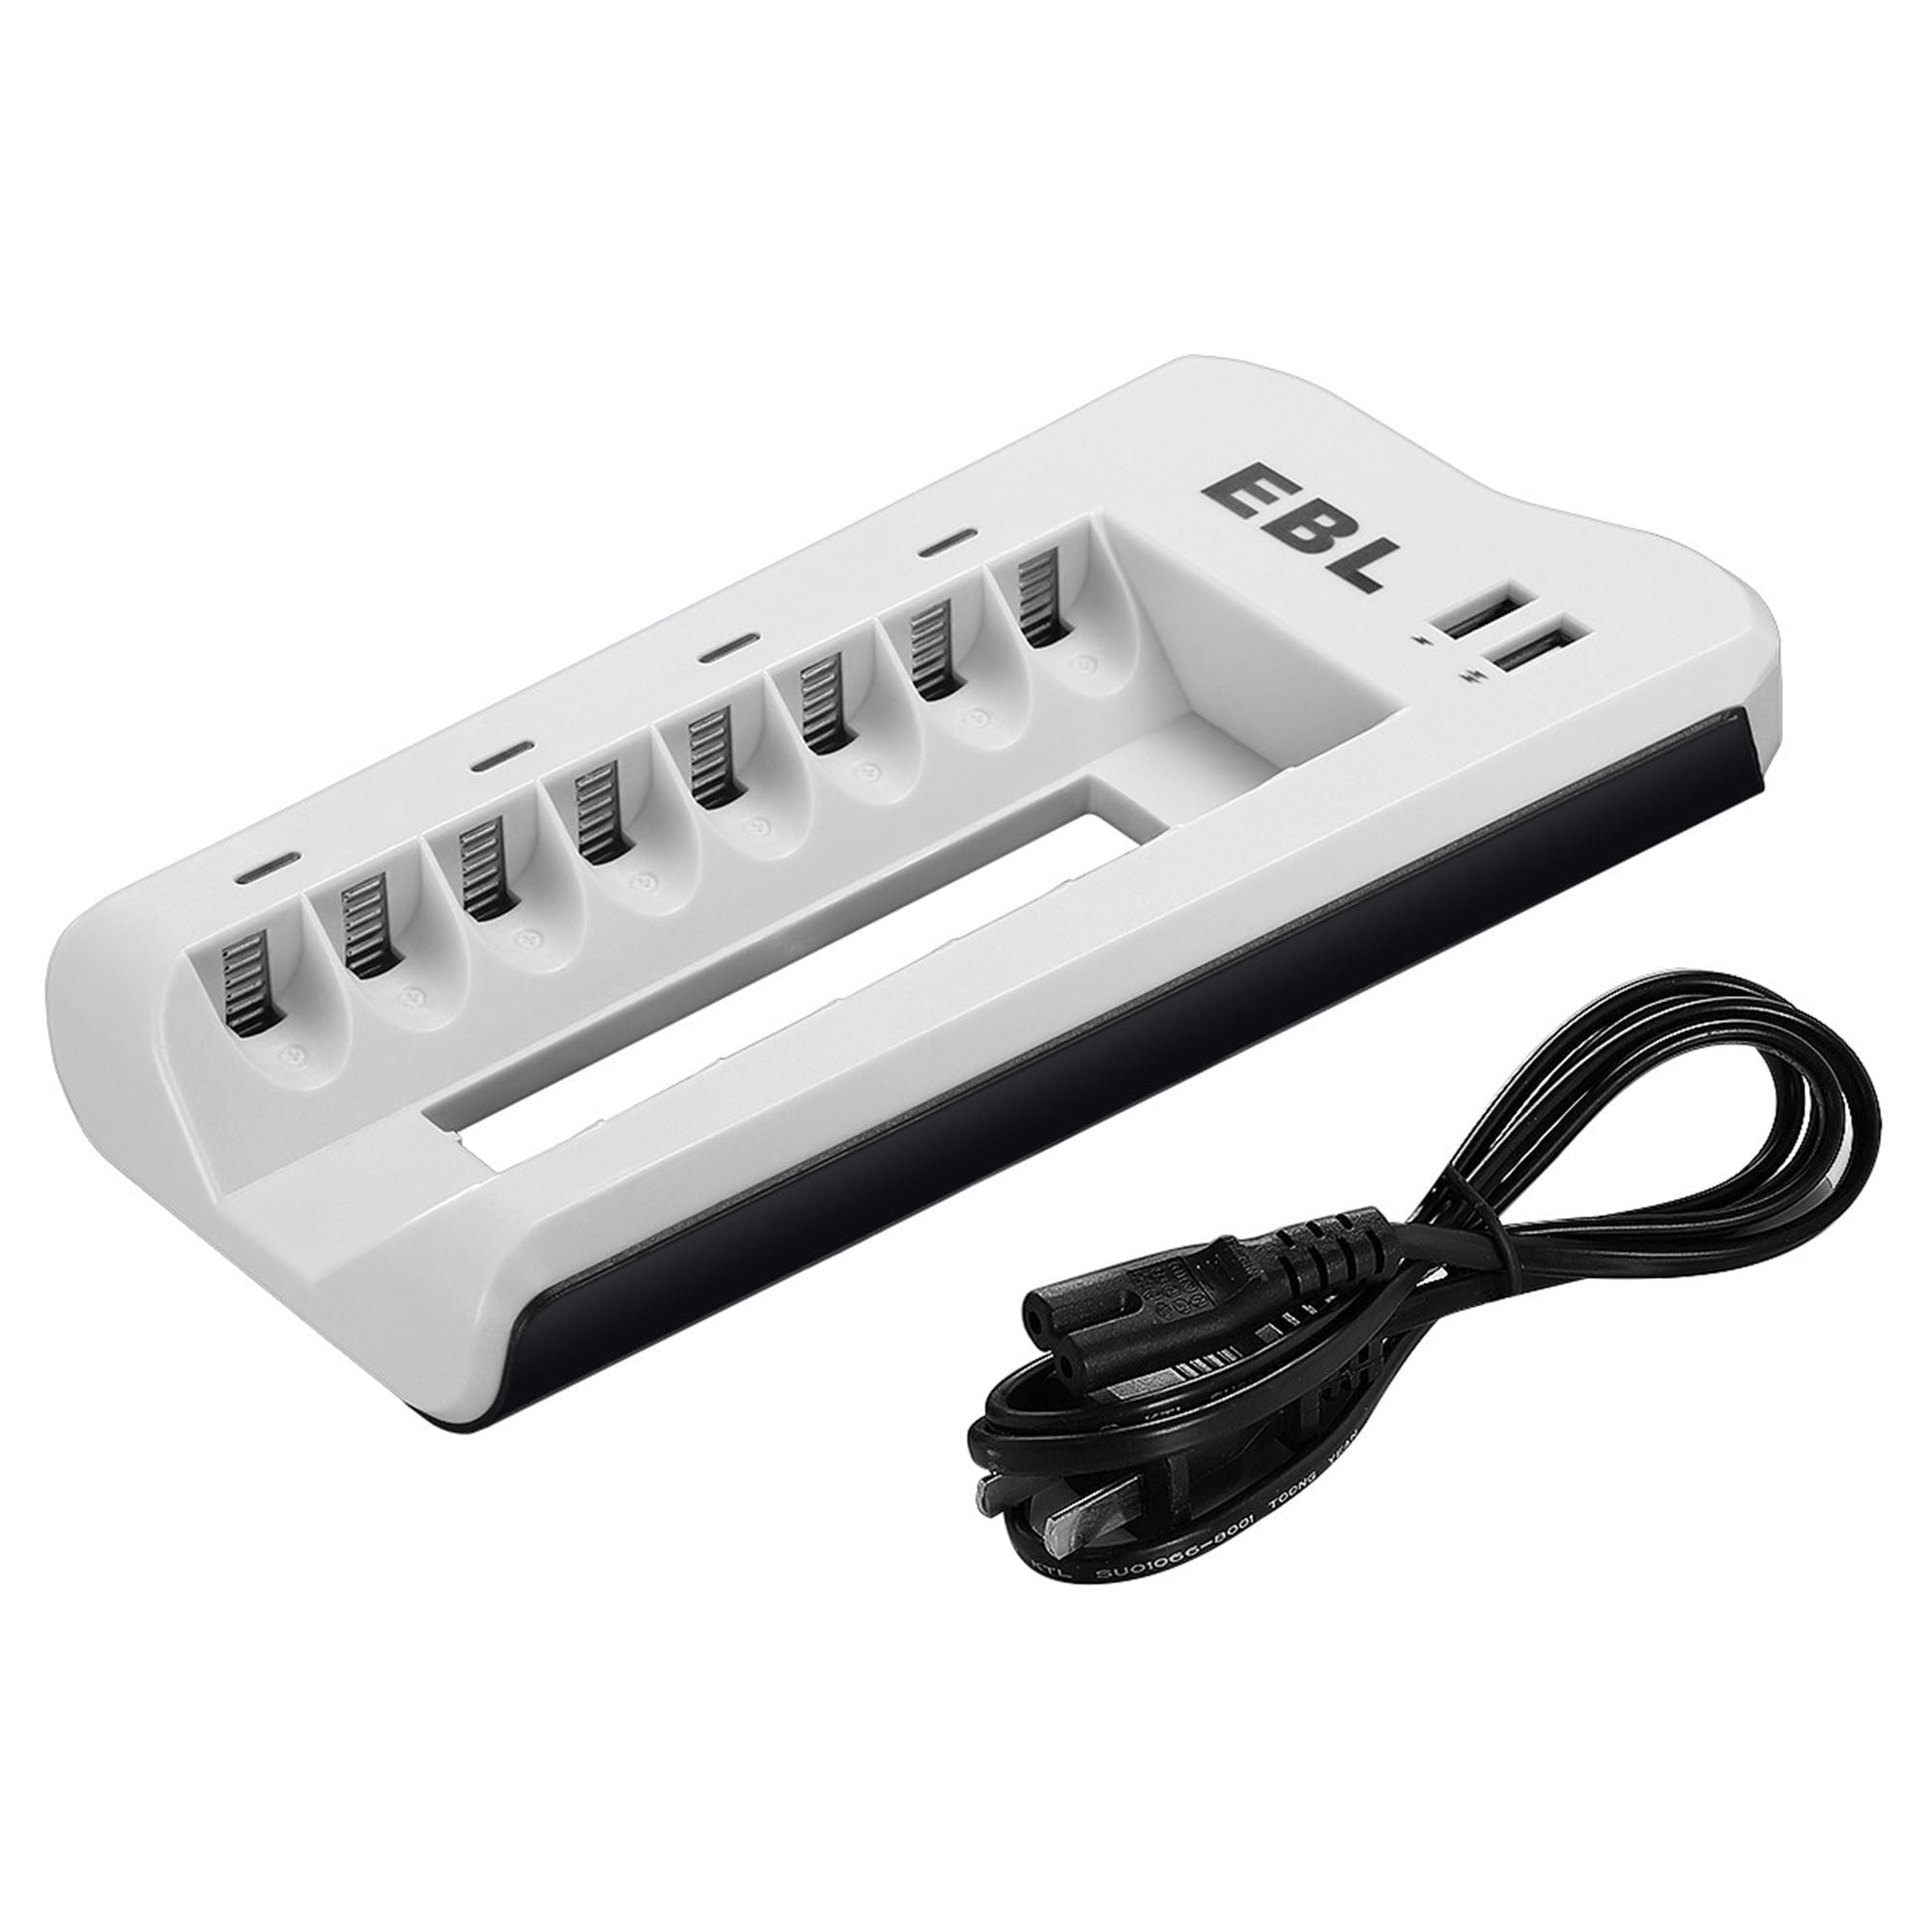 8+1 Bay Smart Battery Charger with LCD Display for AA/AAA Ni-MH/Ni-Cd 9V Rechargeable Batteries Charger Battery Charger